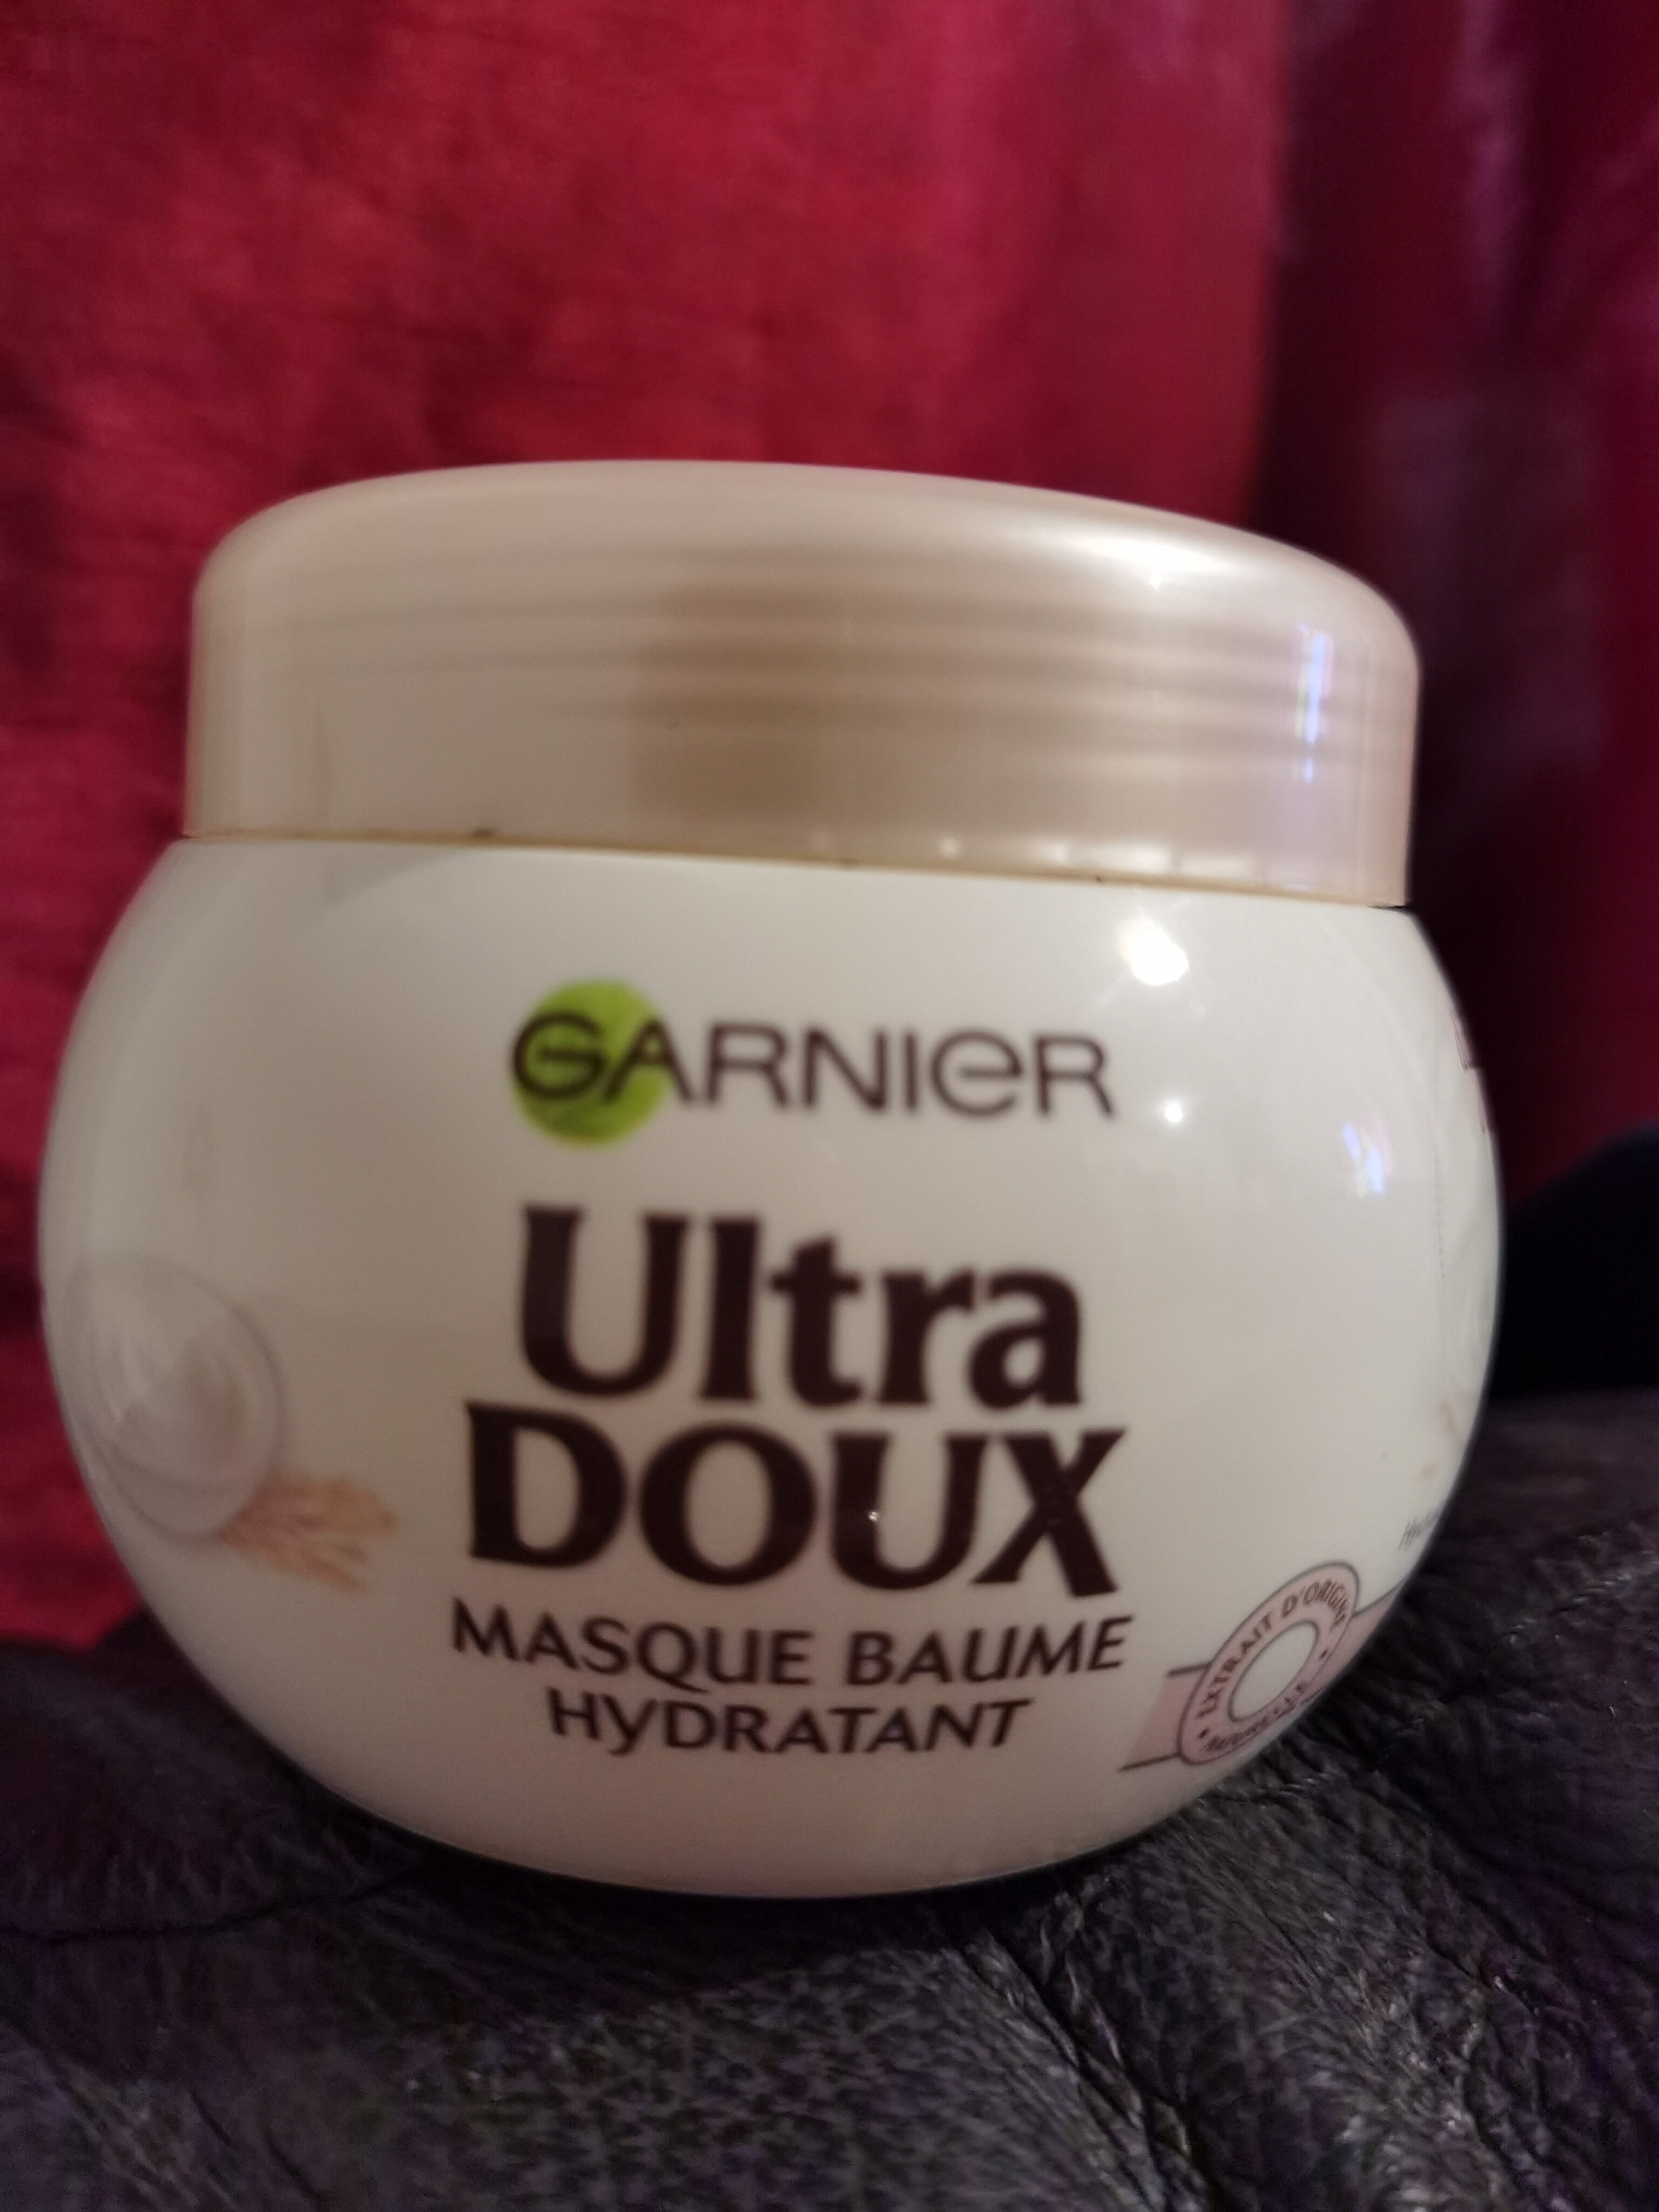 Ultra doux masque baume hydratant - Product - fr